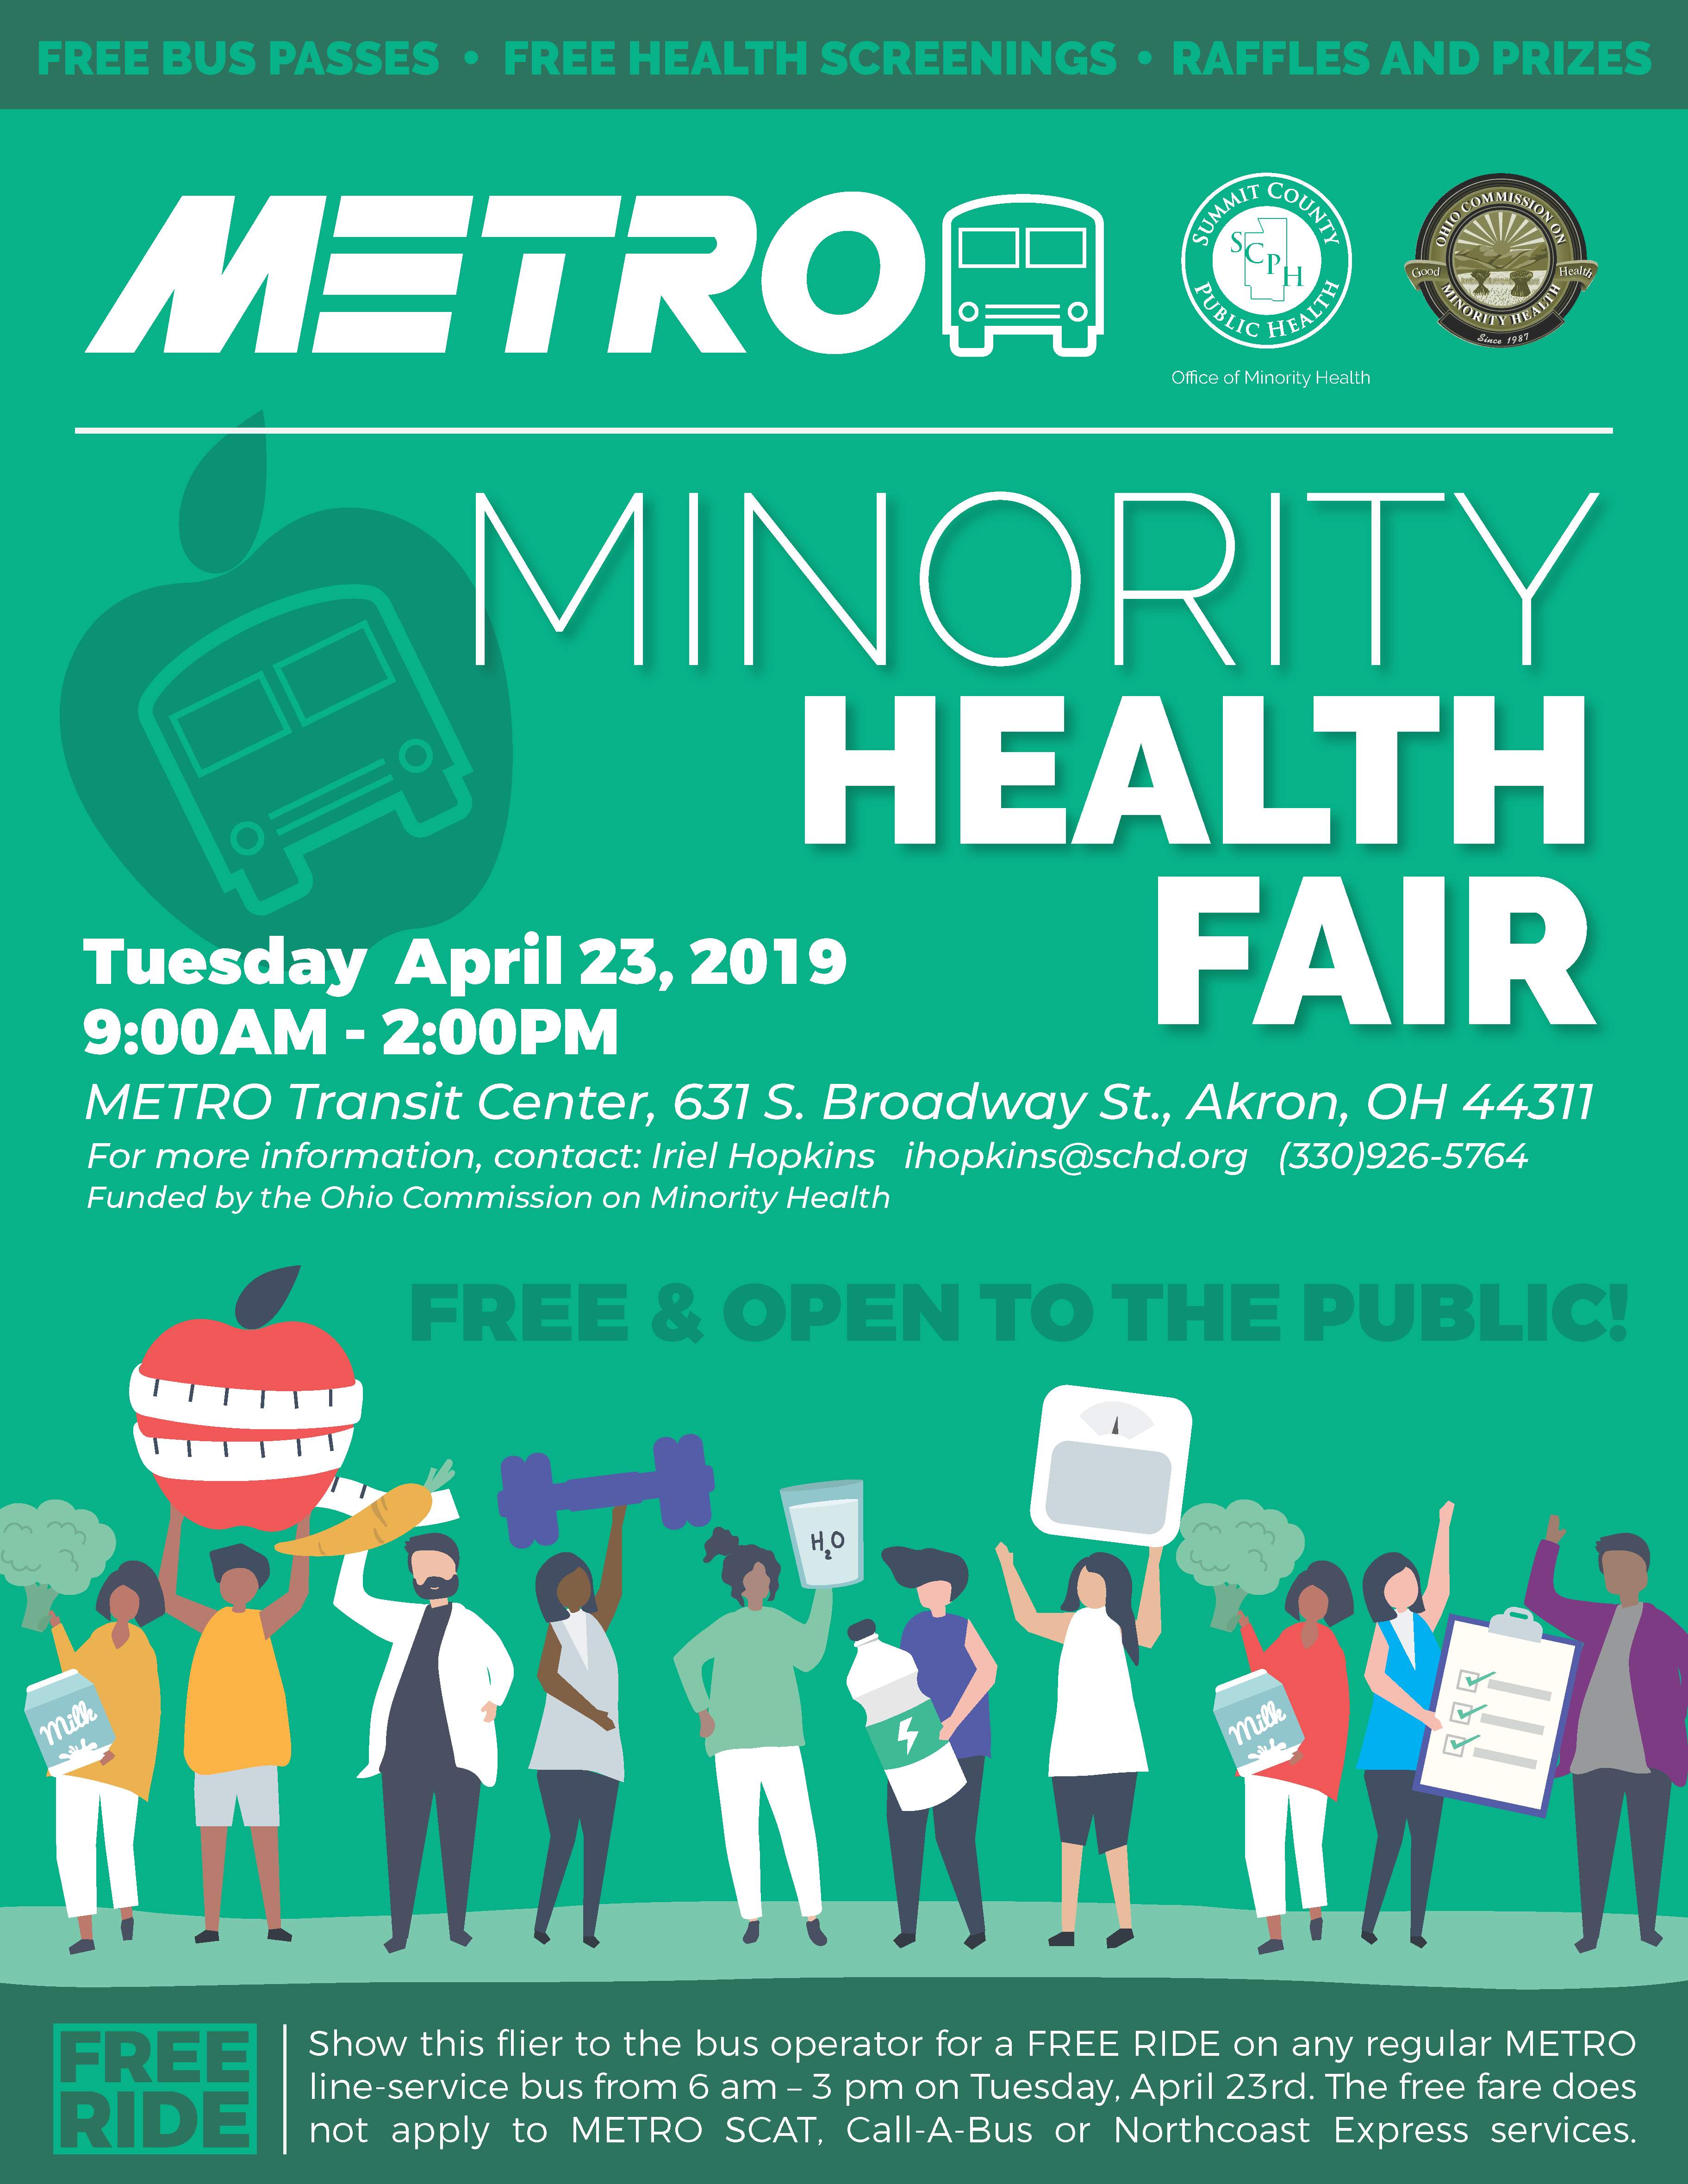 Minority Health Fair on Tuesday, April 23rd from 9 a.m. to 2 p.m. at the Robert K. Pfaff Transit Center, 631 S. Broadway St., Akron. Free health screenings, vendors, raffles, and prizes.